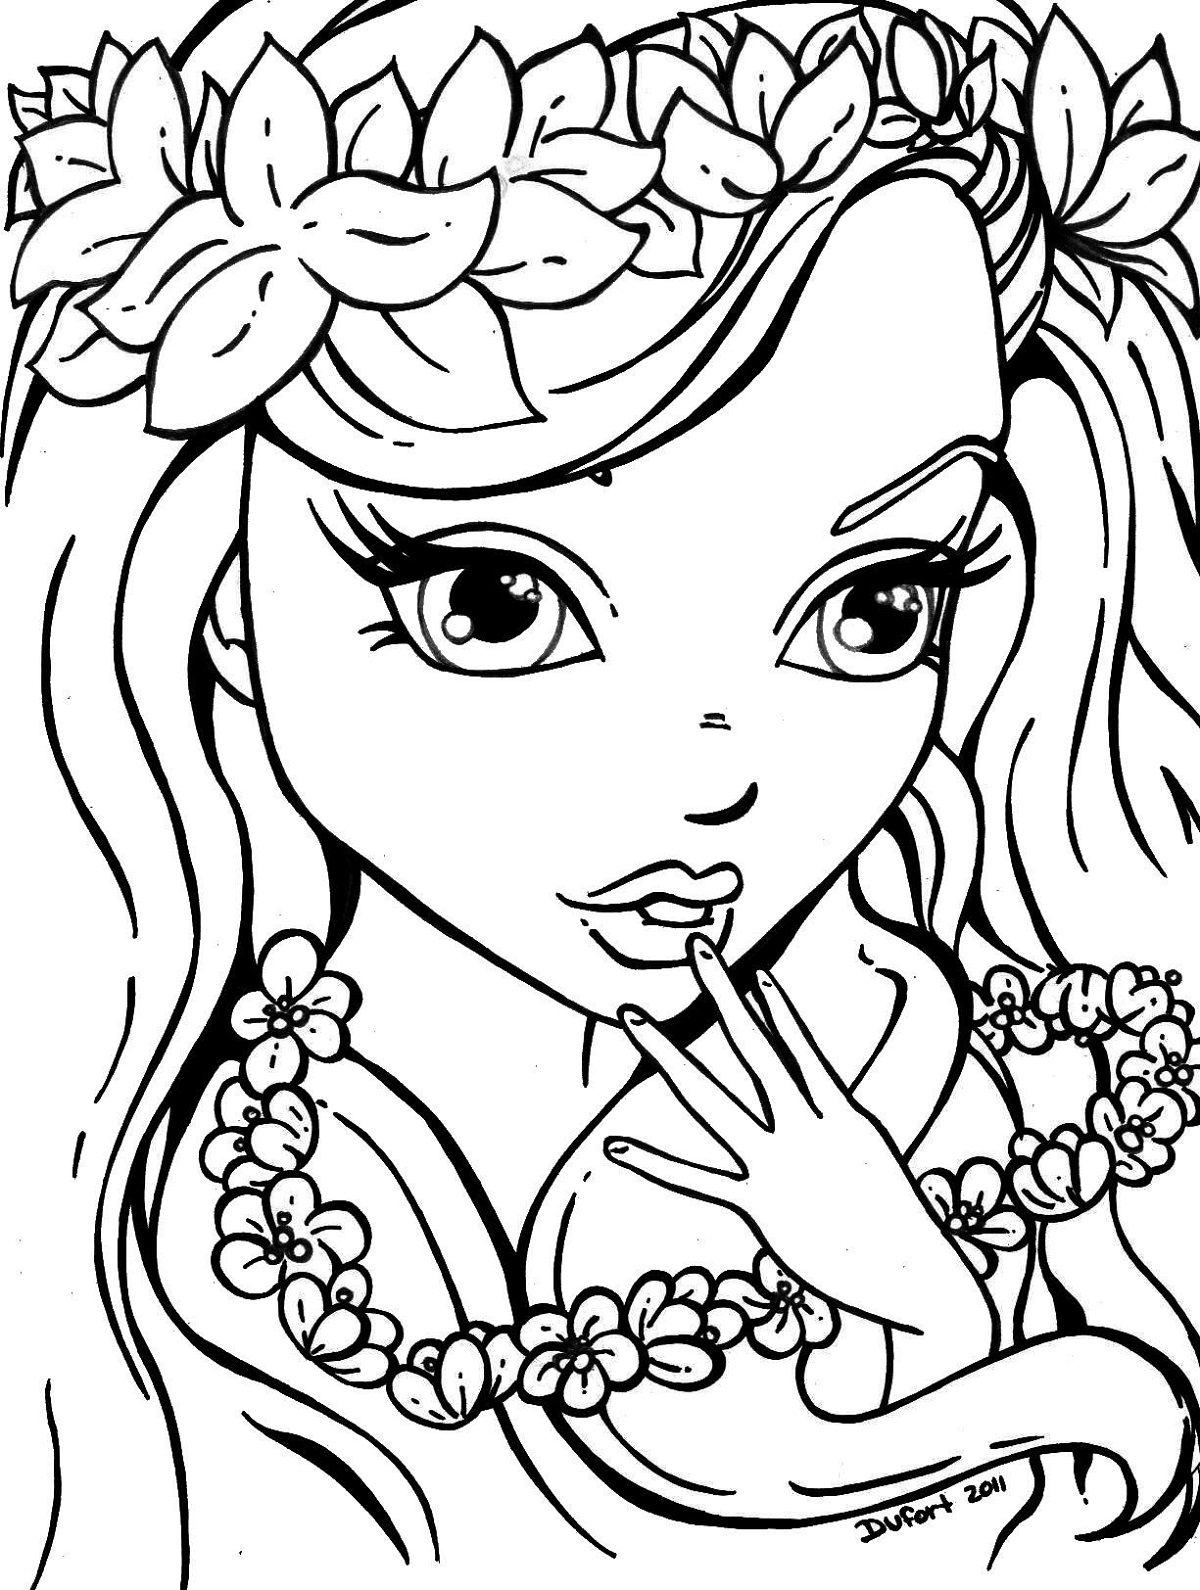 Coloring-Books-For-Teens-Girl.